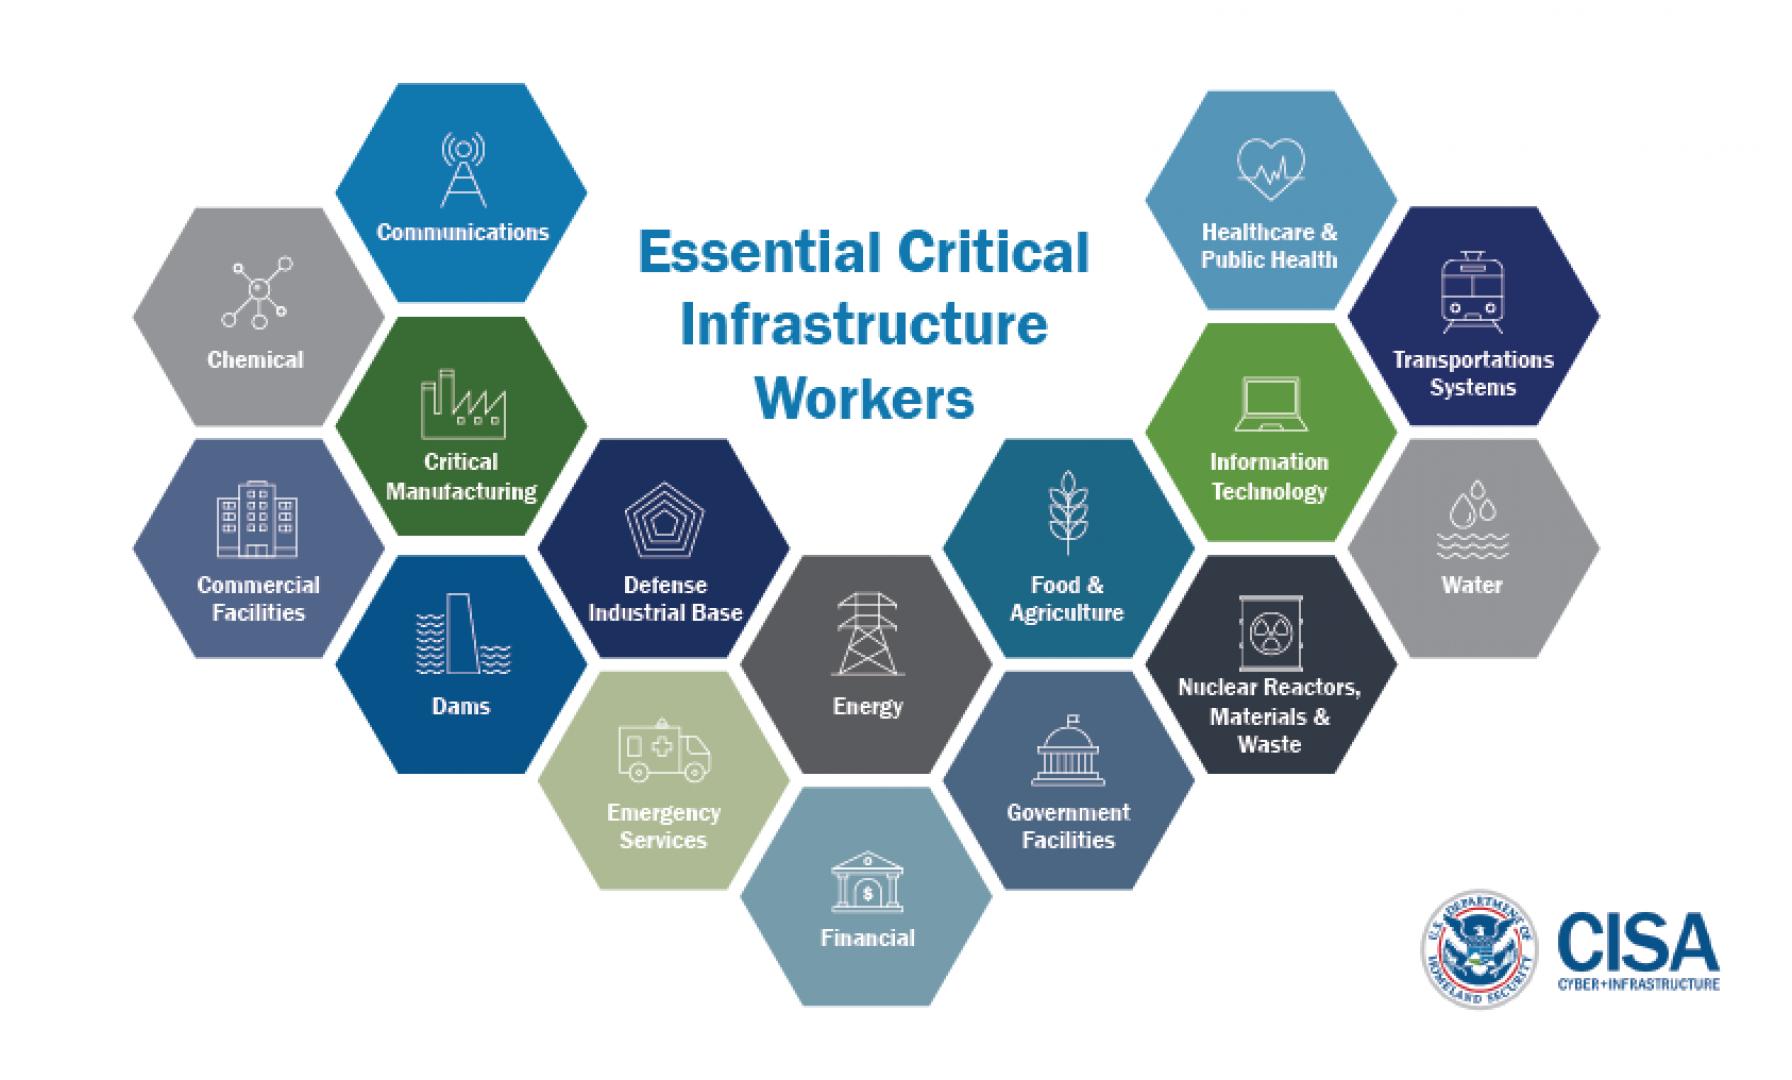 Essential critical infrastructure workers and sectors (from https://www.cisa.gov/identifying-critical-infrastructure-during-covid-19)